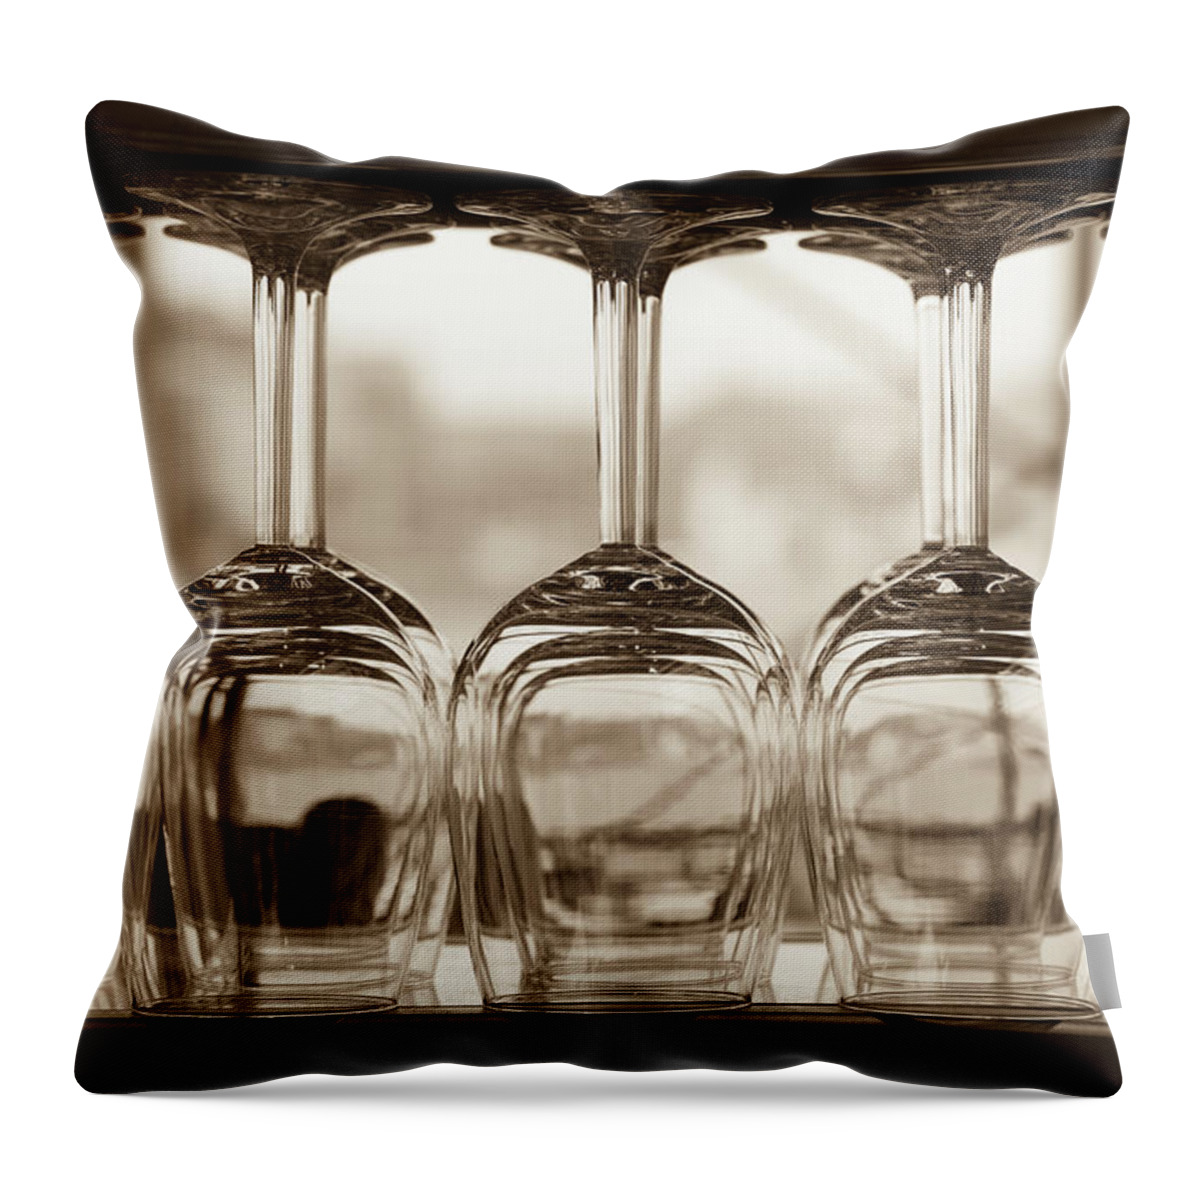 Alcohol Throw Pillow featuring the photograph Close-up Of Wine Glasses With Shallow by 77studio